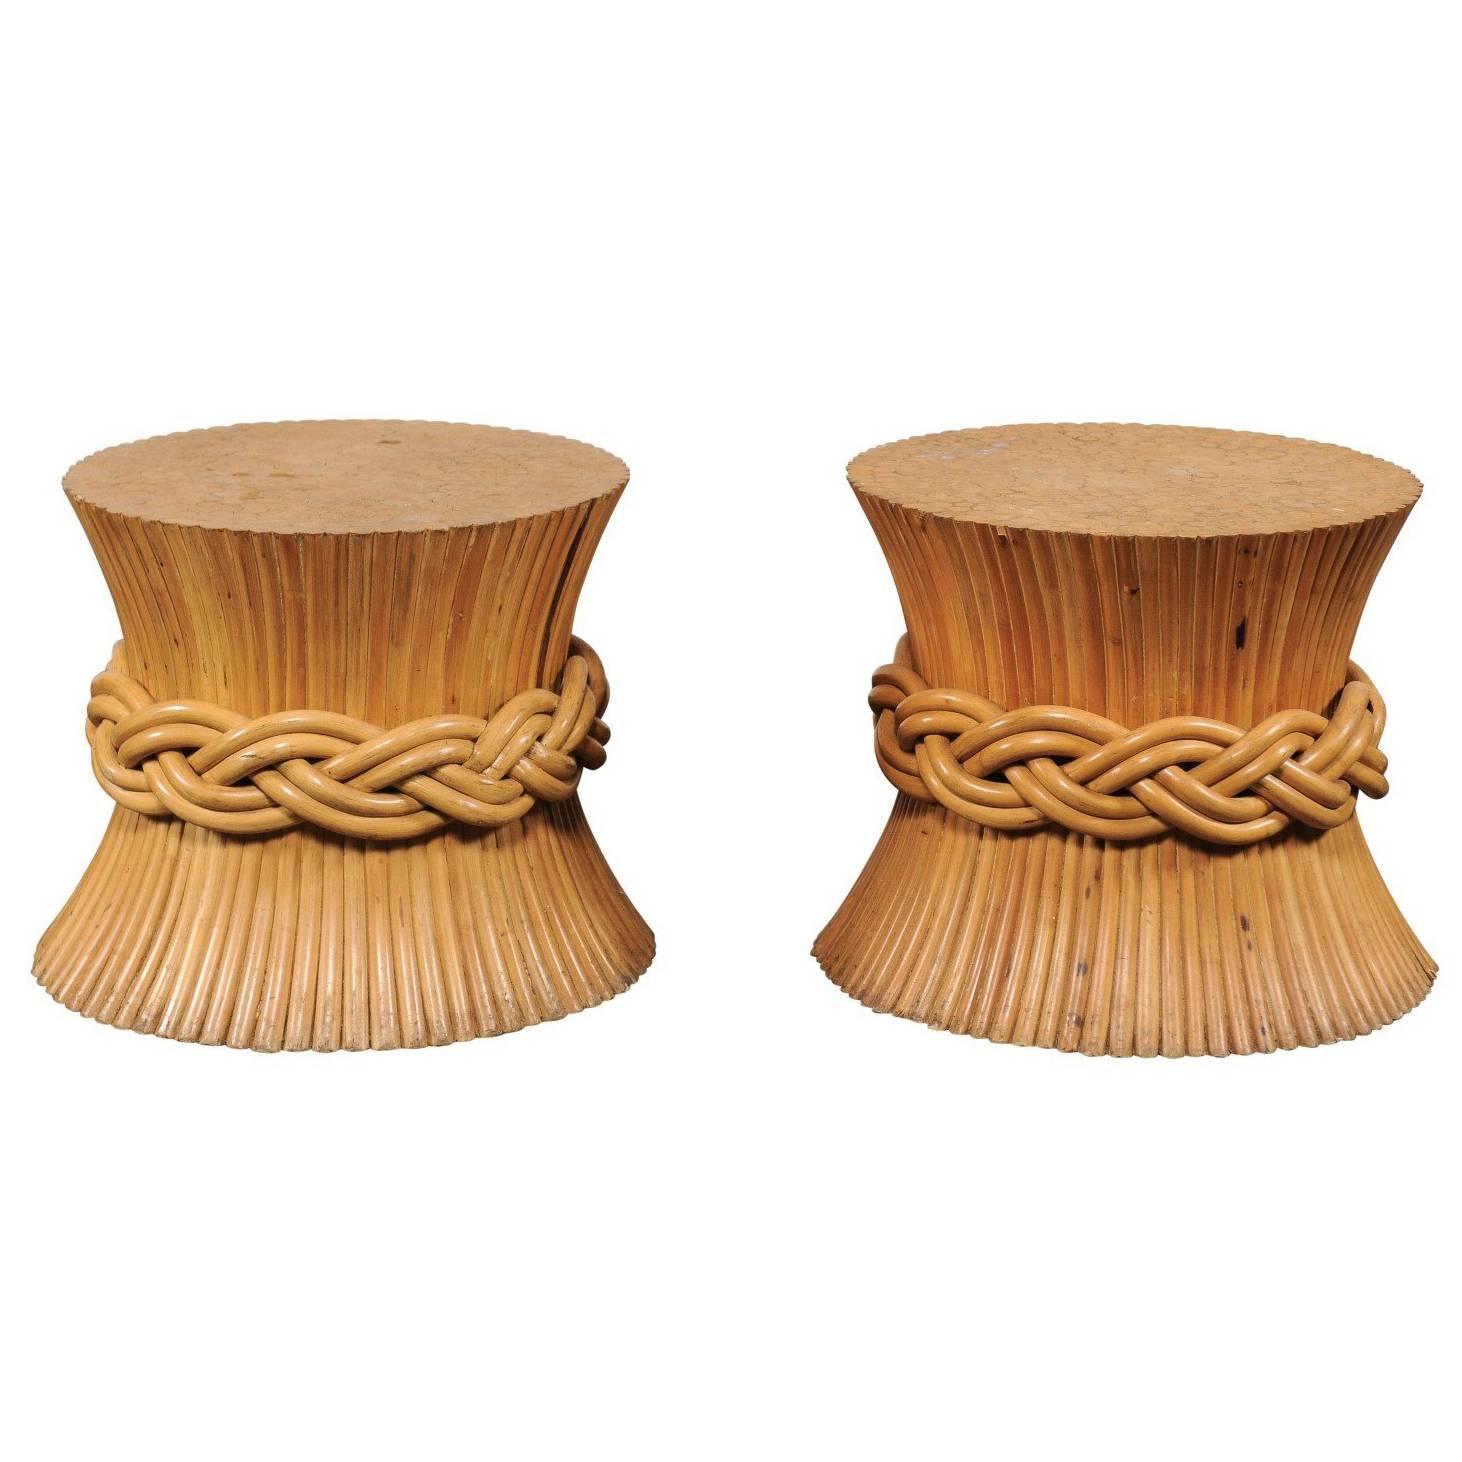 Pair of Sheaf of Wheat Tables Attributed to McGuire, circa 1970s